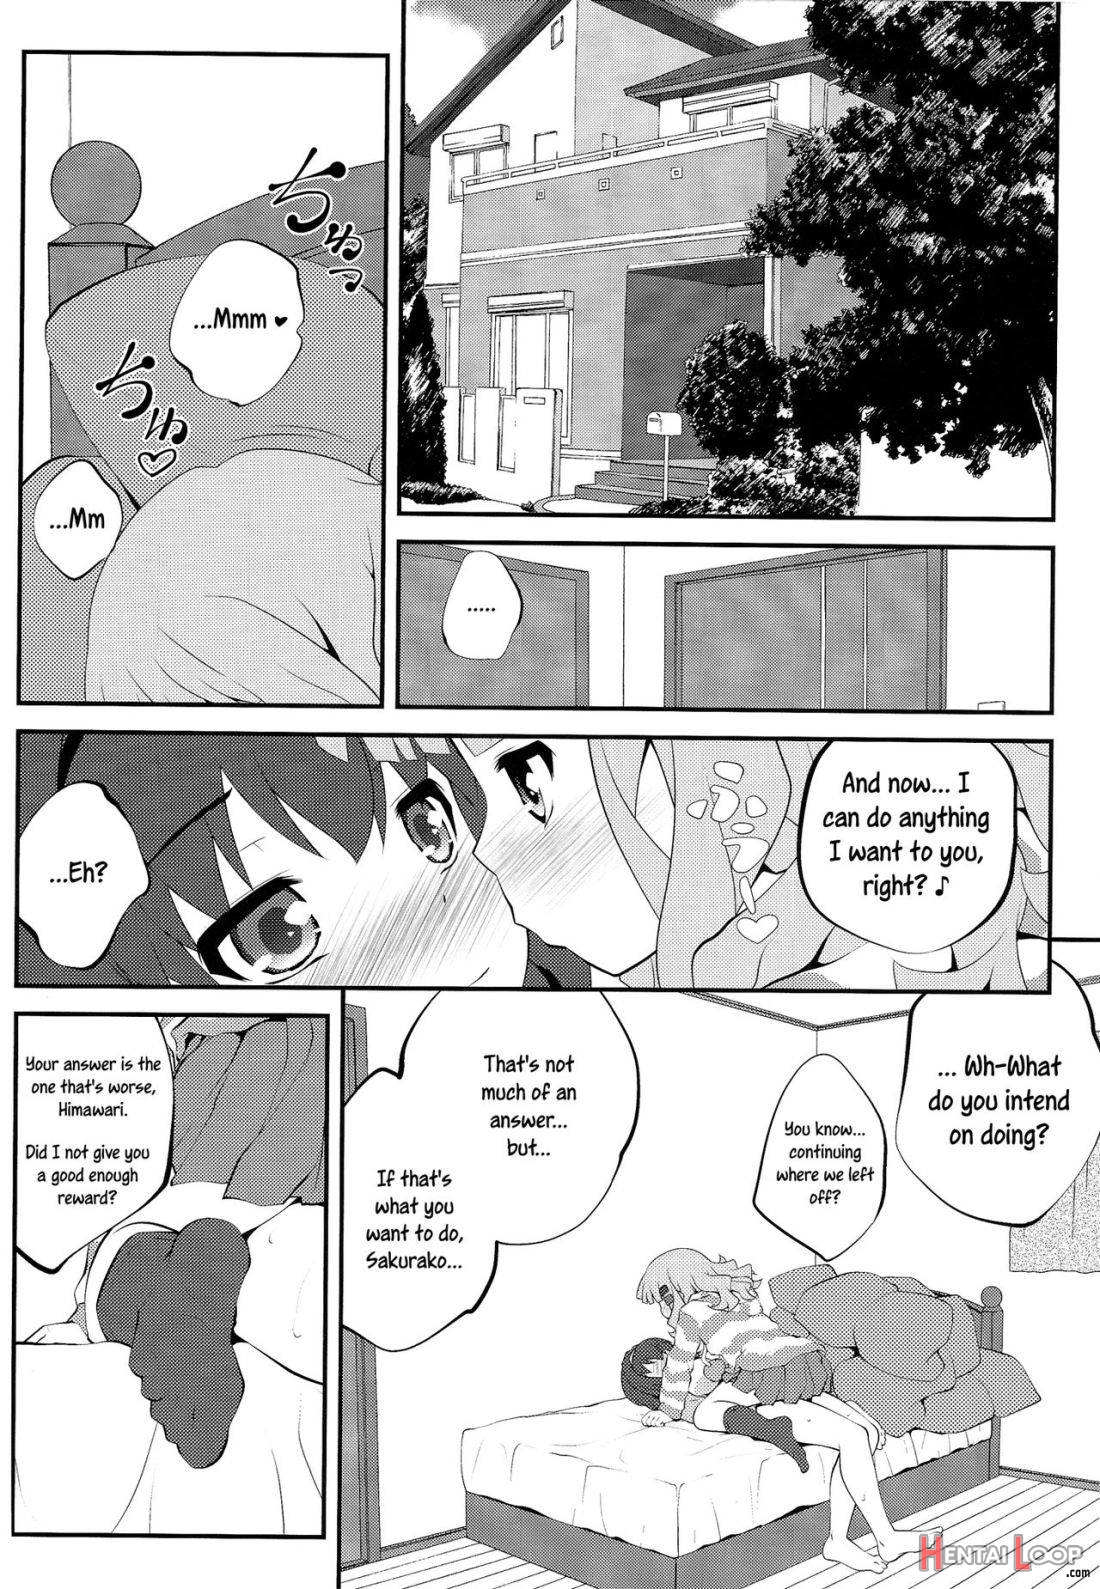 Himegoto Flowers 7 page 3